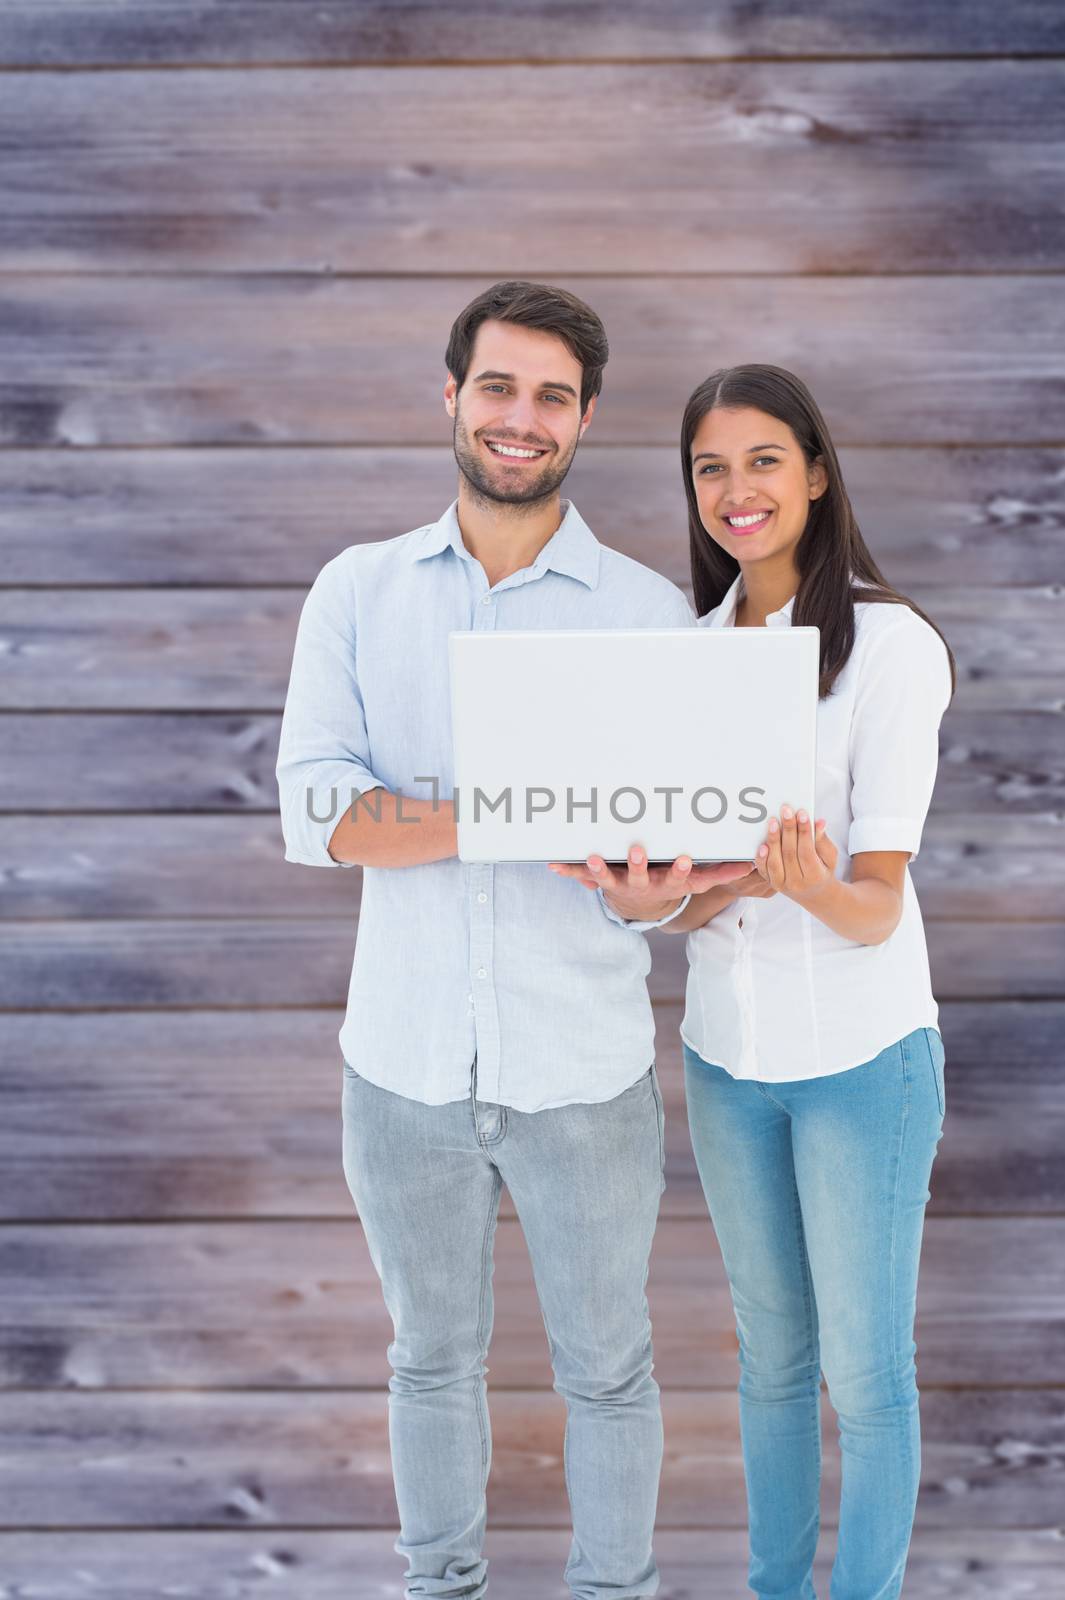 Composite image of attractive young couple holding their laptop by Wavebreakmedia